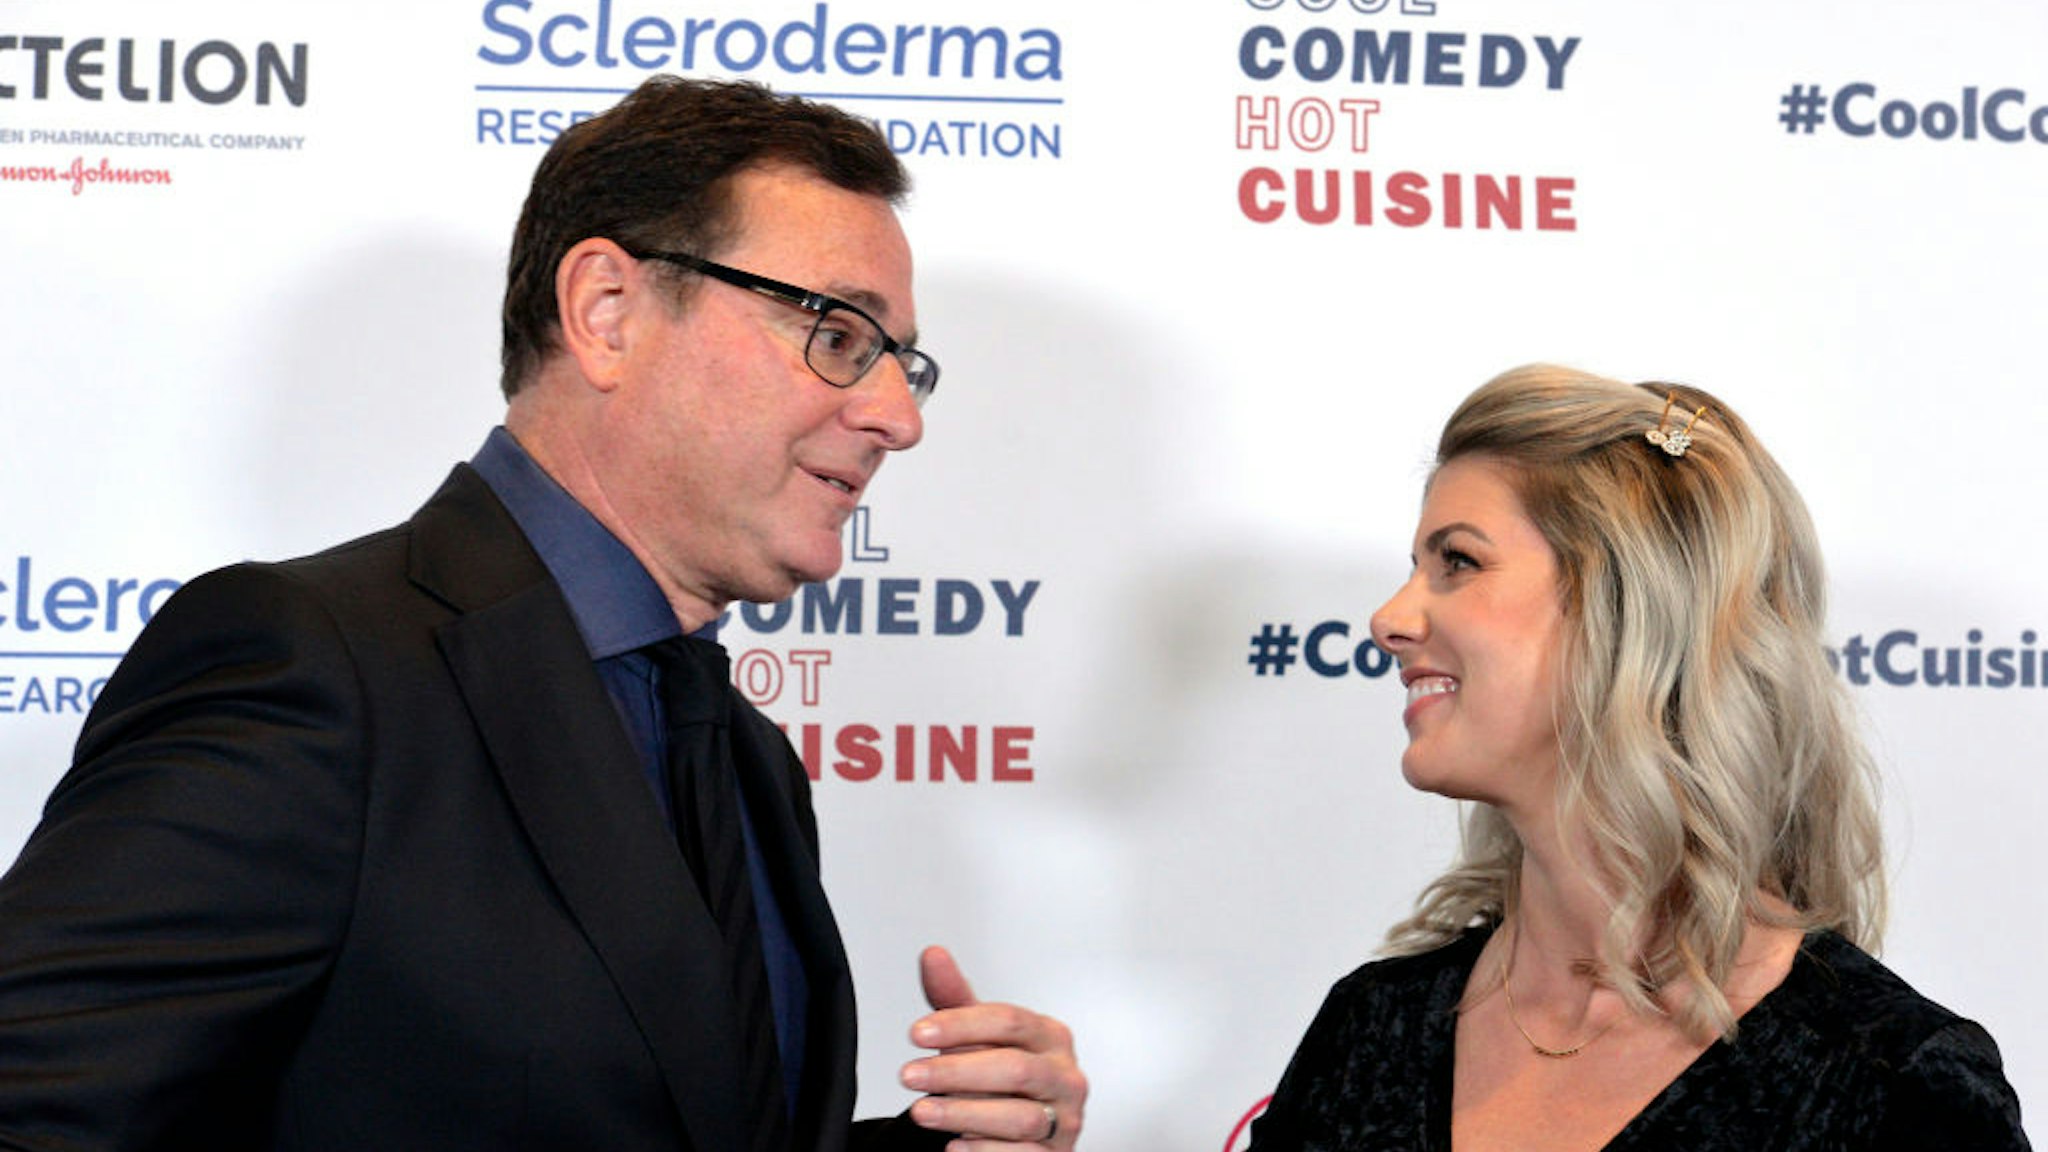 BEVERLY HILLS, CALIFORNIA - APRIL 25: Bob Saget and Kelly Rizzo attend Bob Saget's Cool Comedy Hot Cuisine presented by the Scleroderma Research Foundation at the Beverly Wilshire Four Seasons Hotel on April 25, 2019 in Beverly Hills, California. (Photo by Michael Tullberg/Getty Images)